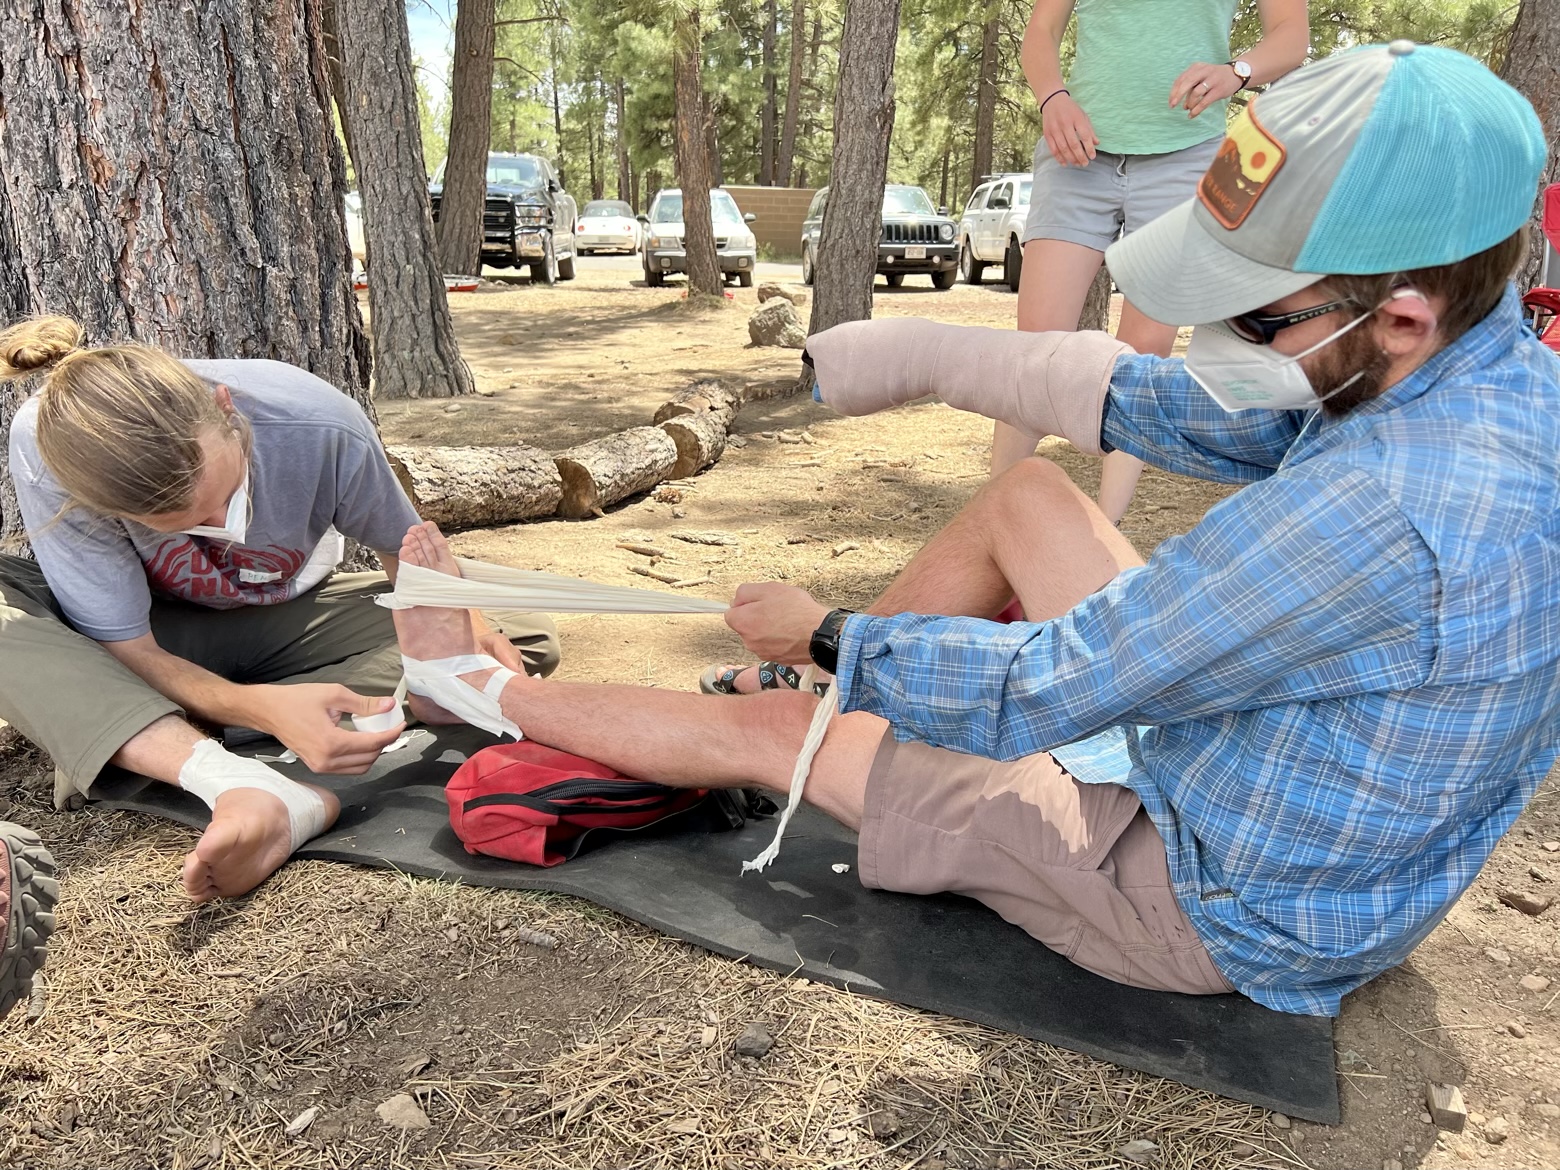 Taping ankles and splinting wrists at a hybrid Wilderness First Responder course